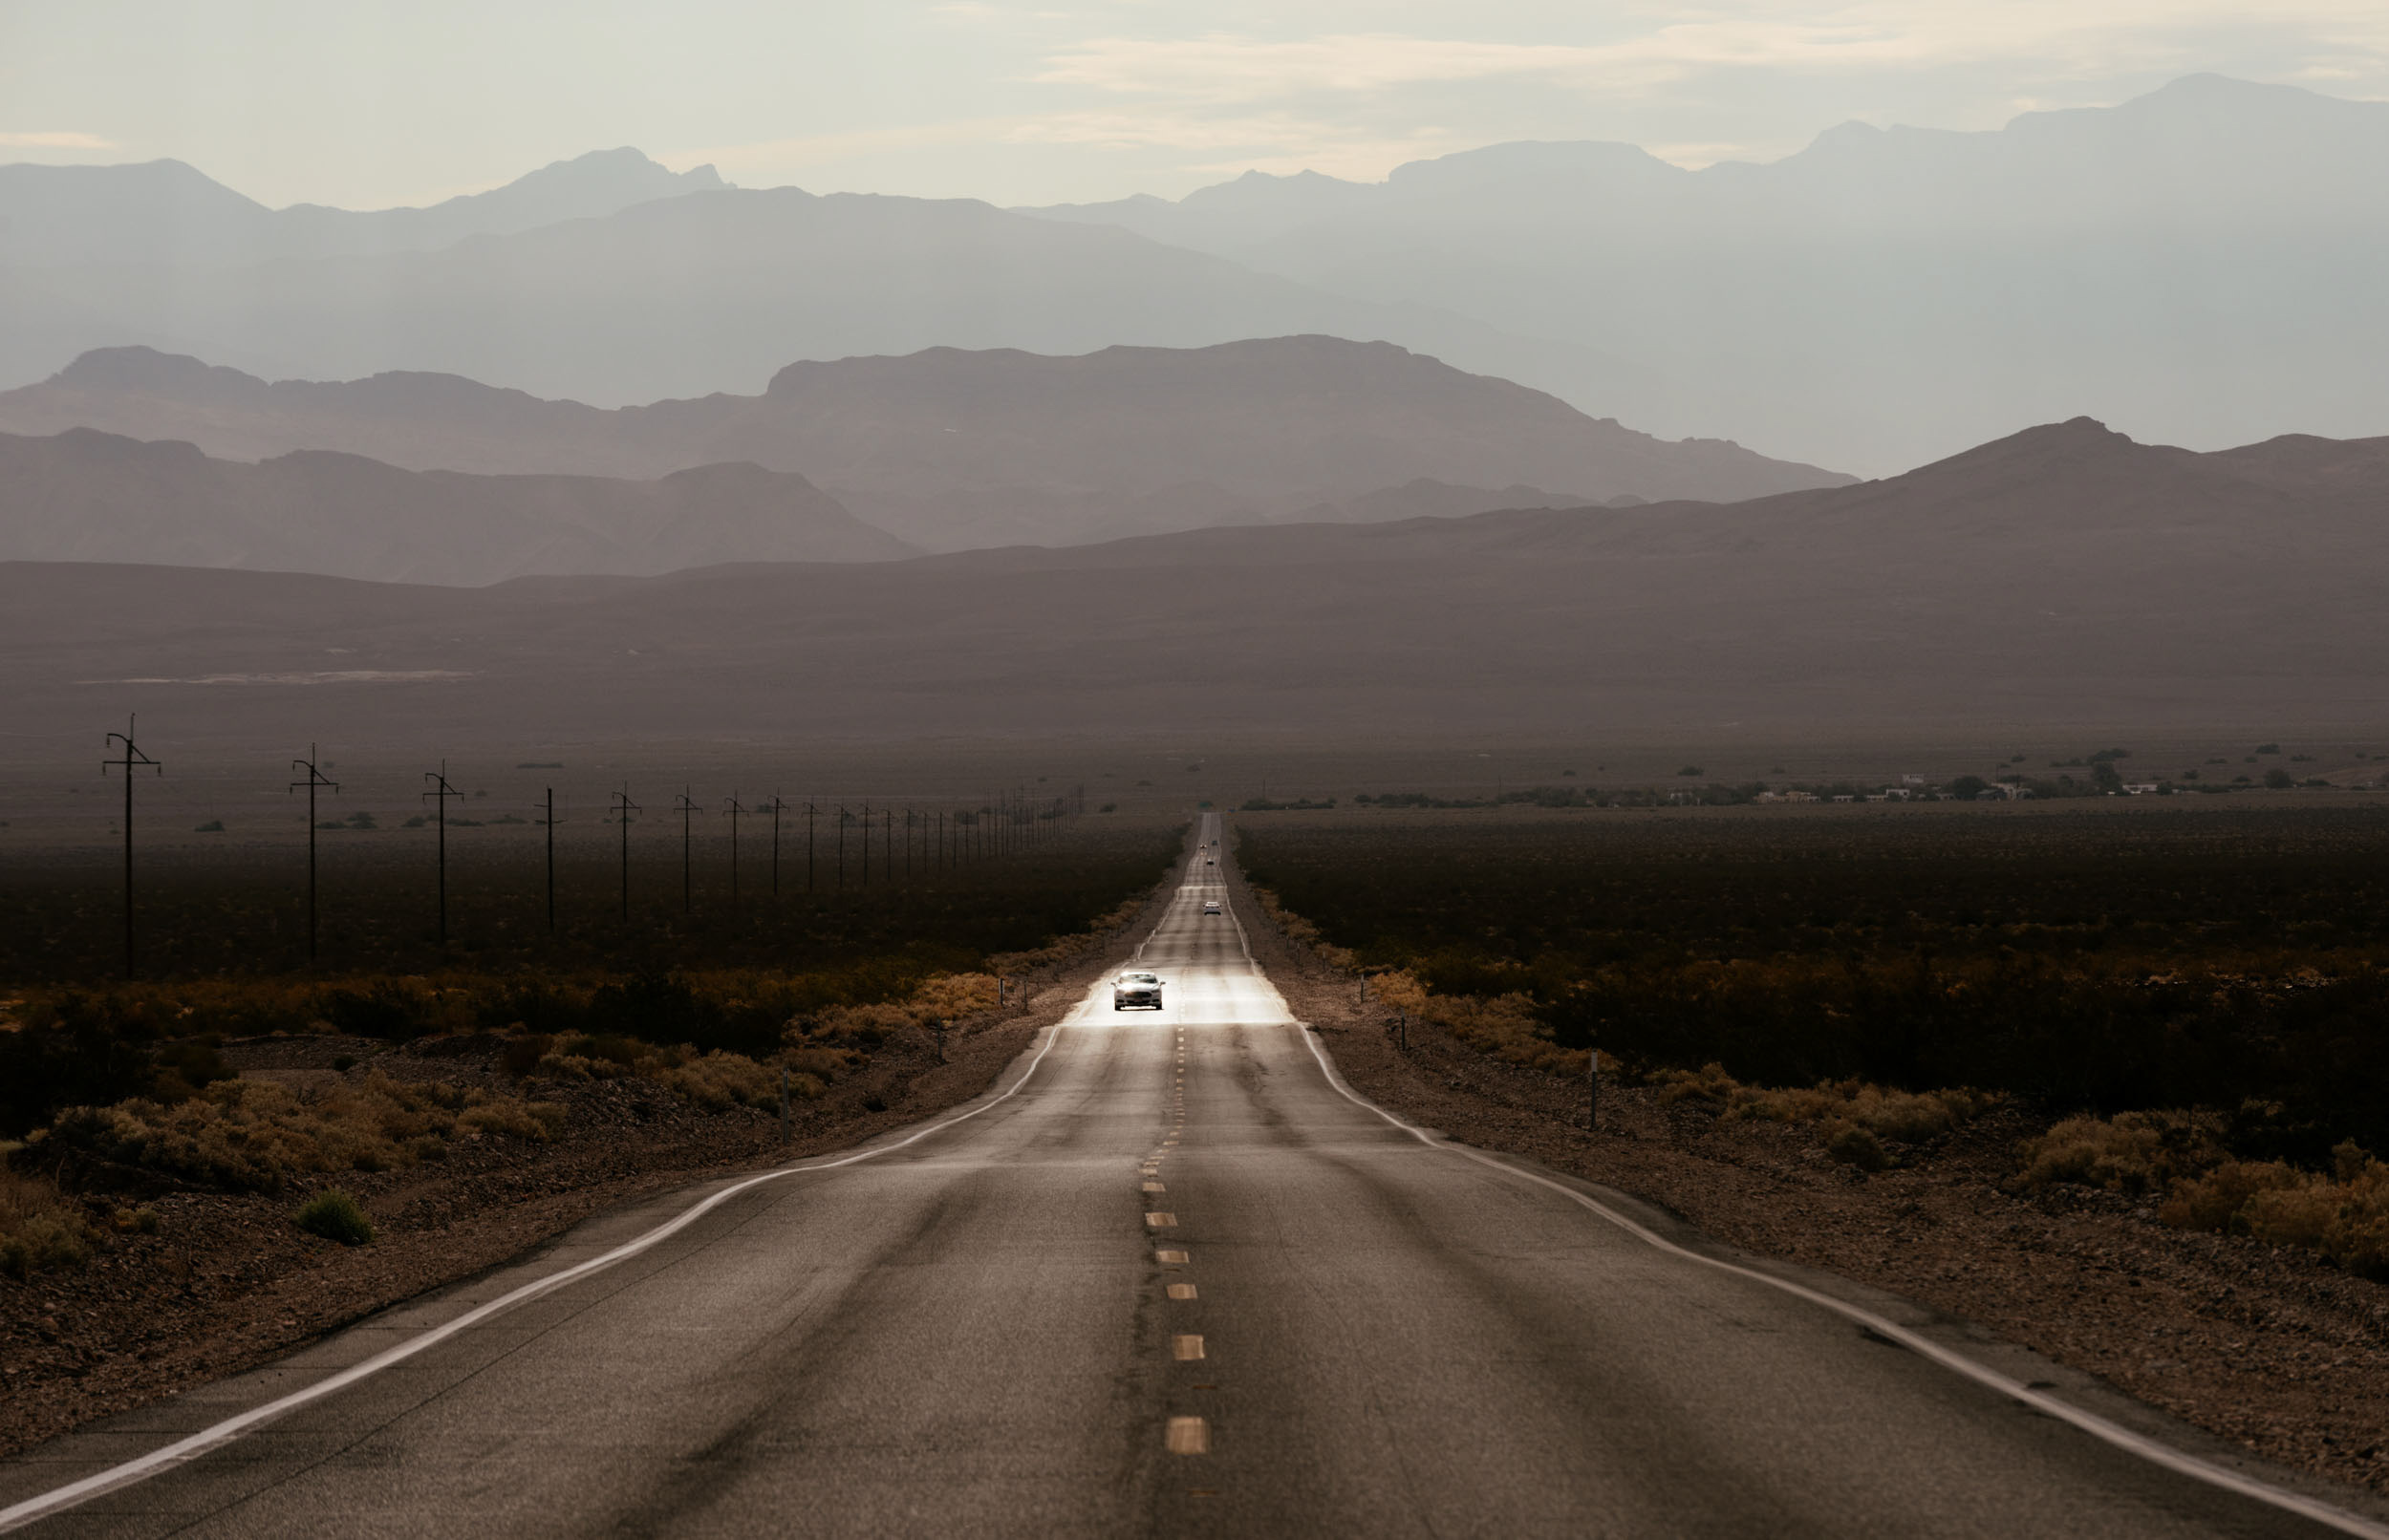 highway-190-road-death-valley-national-park-california-usa-america-travel-road-trip